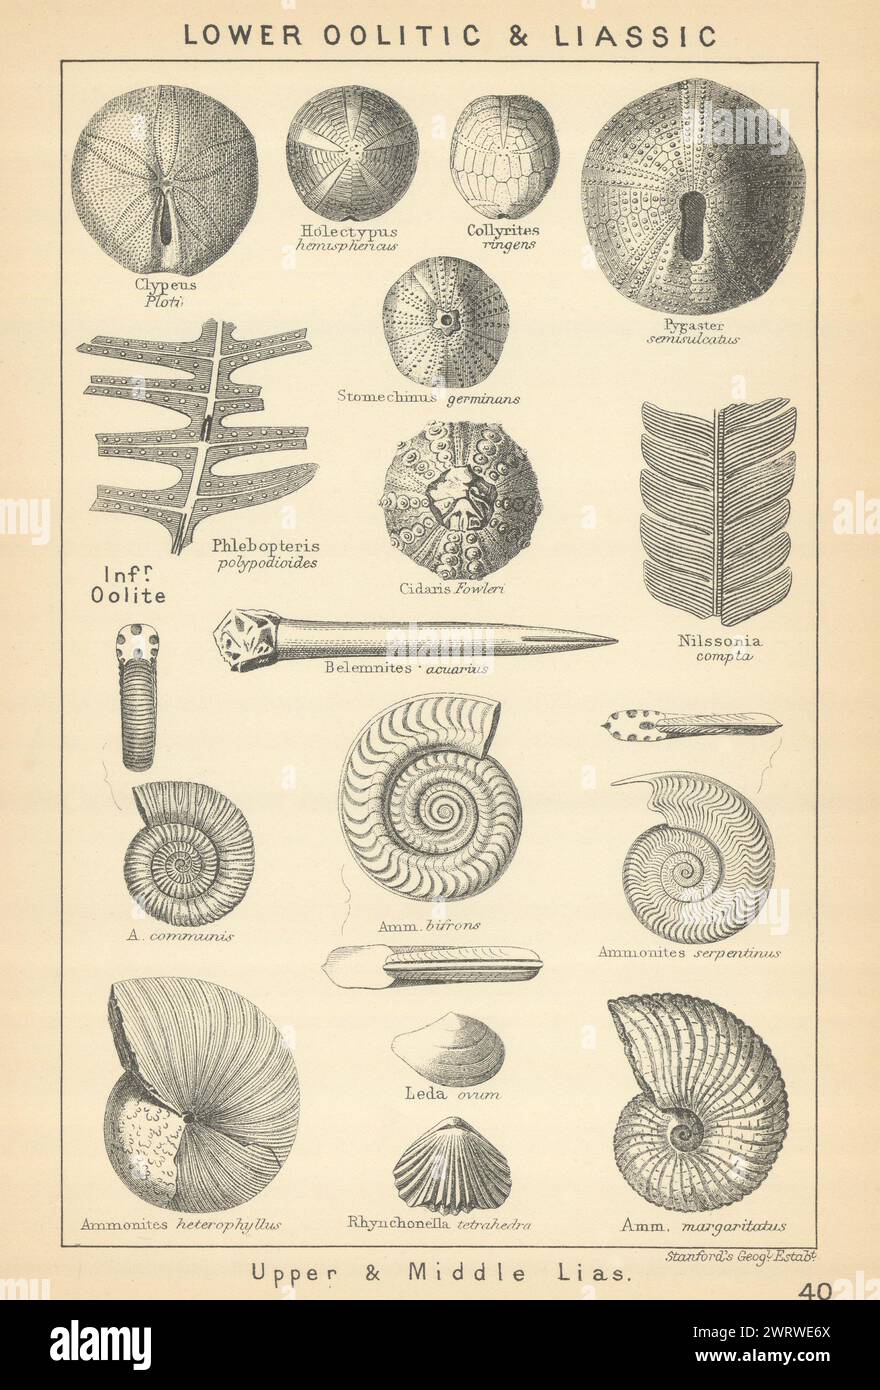 BRITISH FOSSILS. Lower Oolitic & Liassic - Upper and Middle Lias. STANFORD 1904 Stock Photo